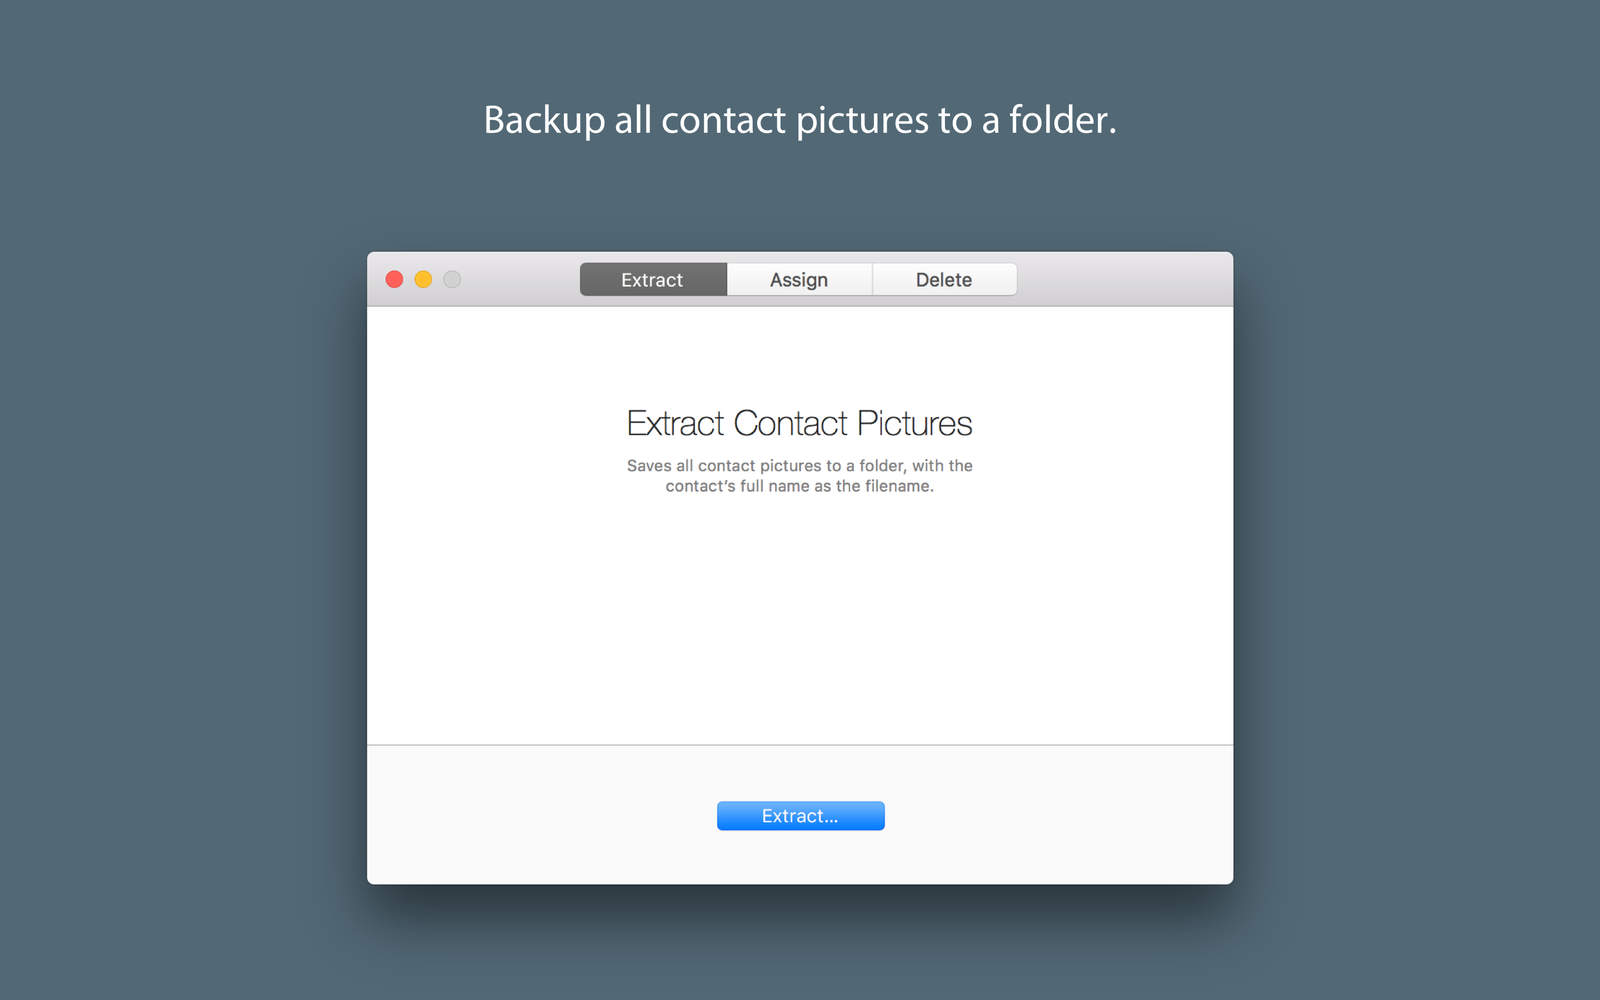 Backup Contact Pictures 1.0 : Main Window